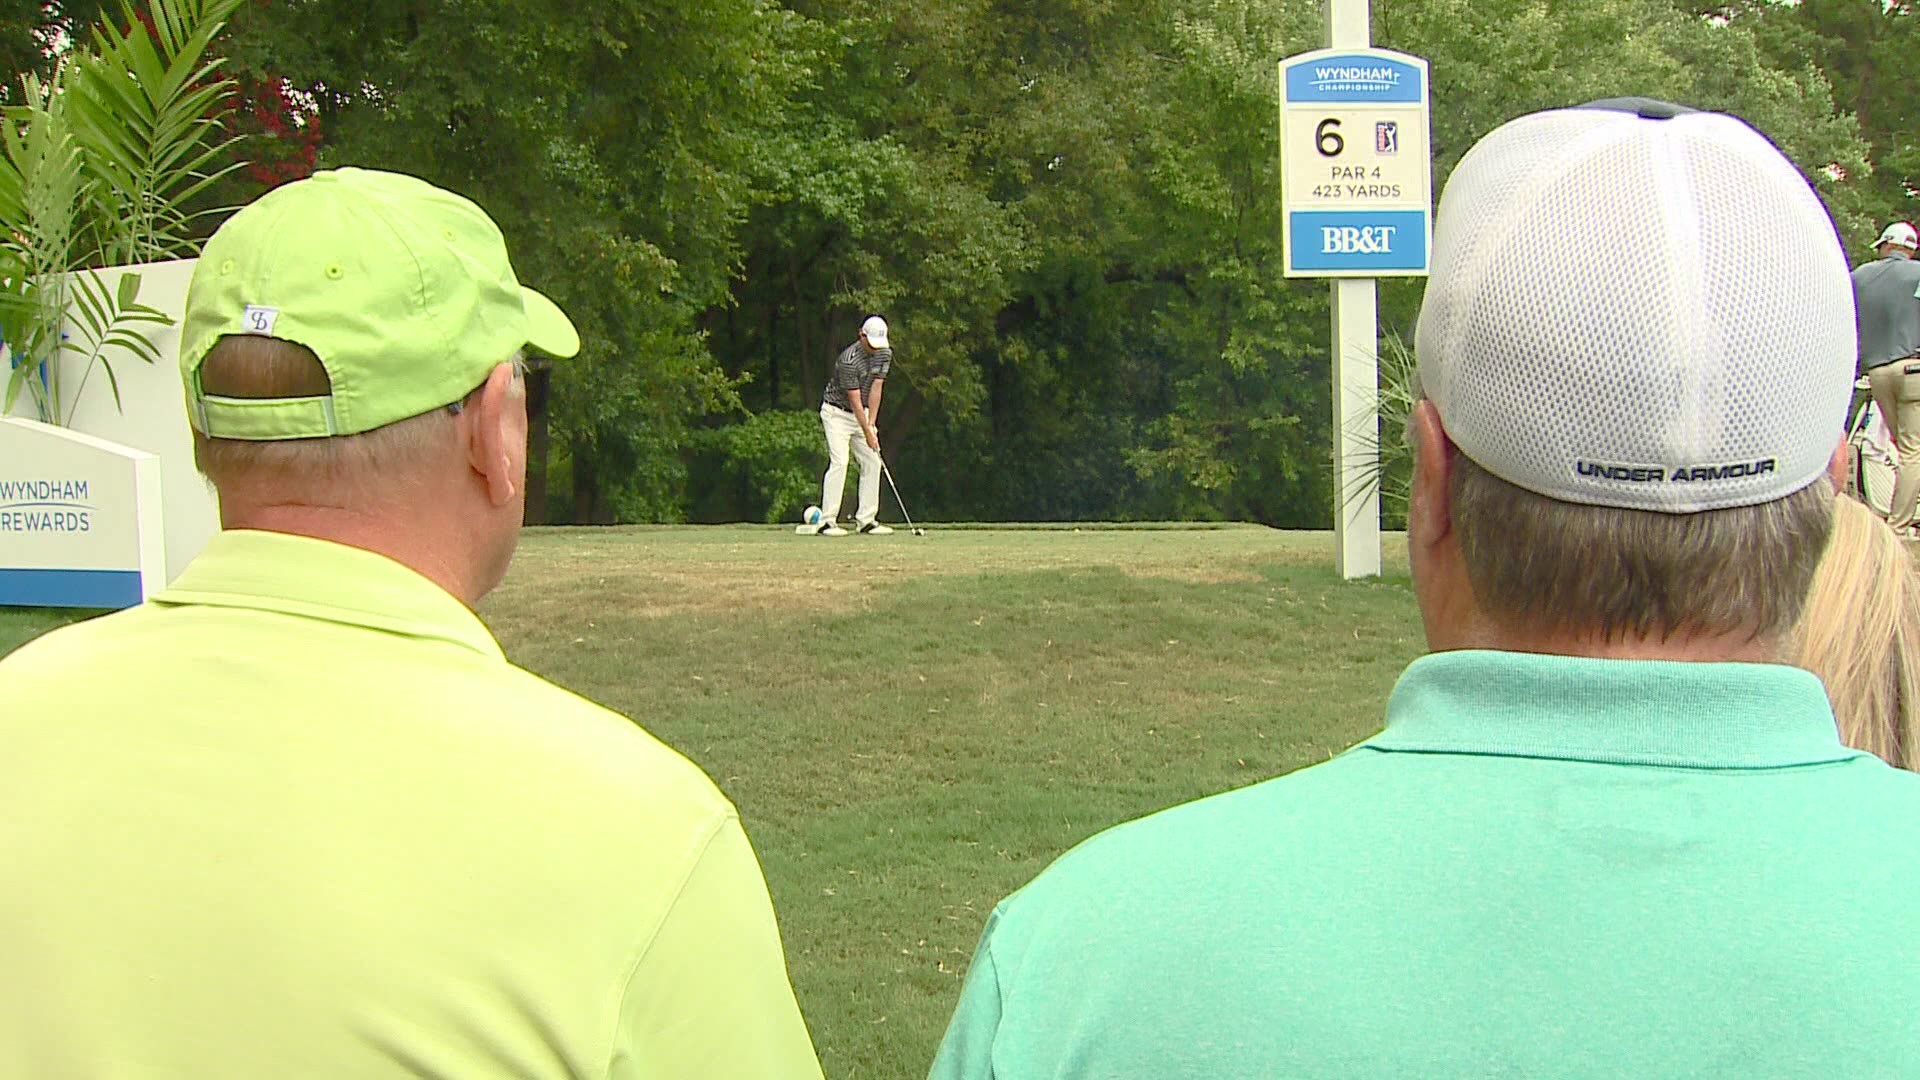 The 80th Wyndham Championship A Fans Guide For Golfs Annual Stop In Greensboro wfmynews2